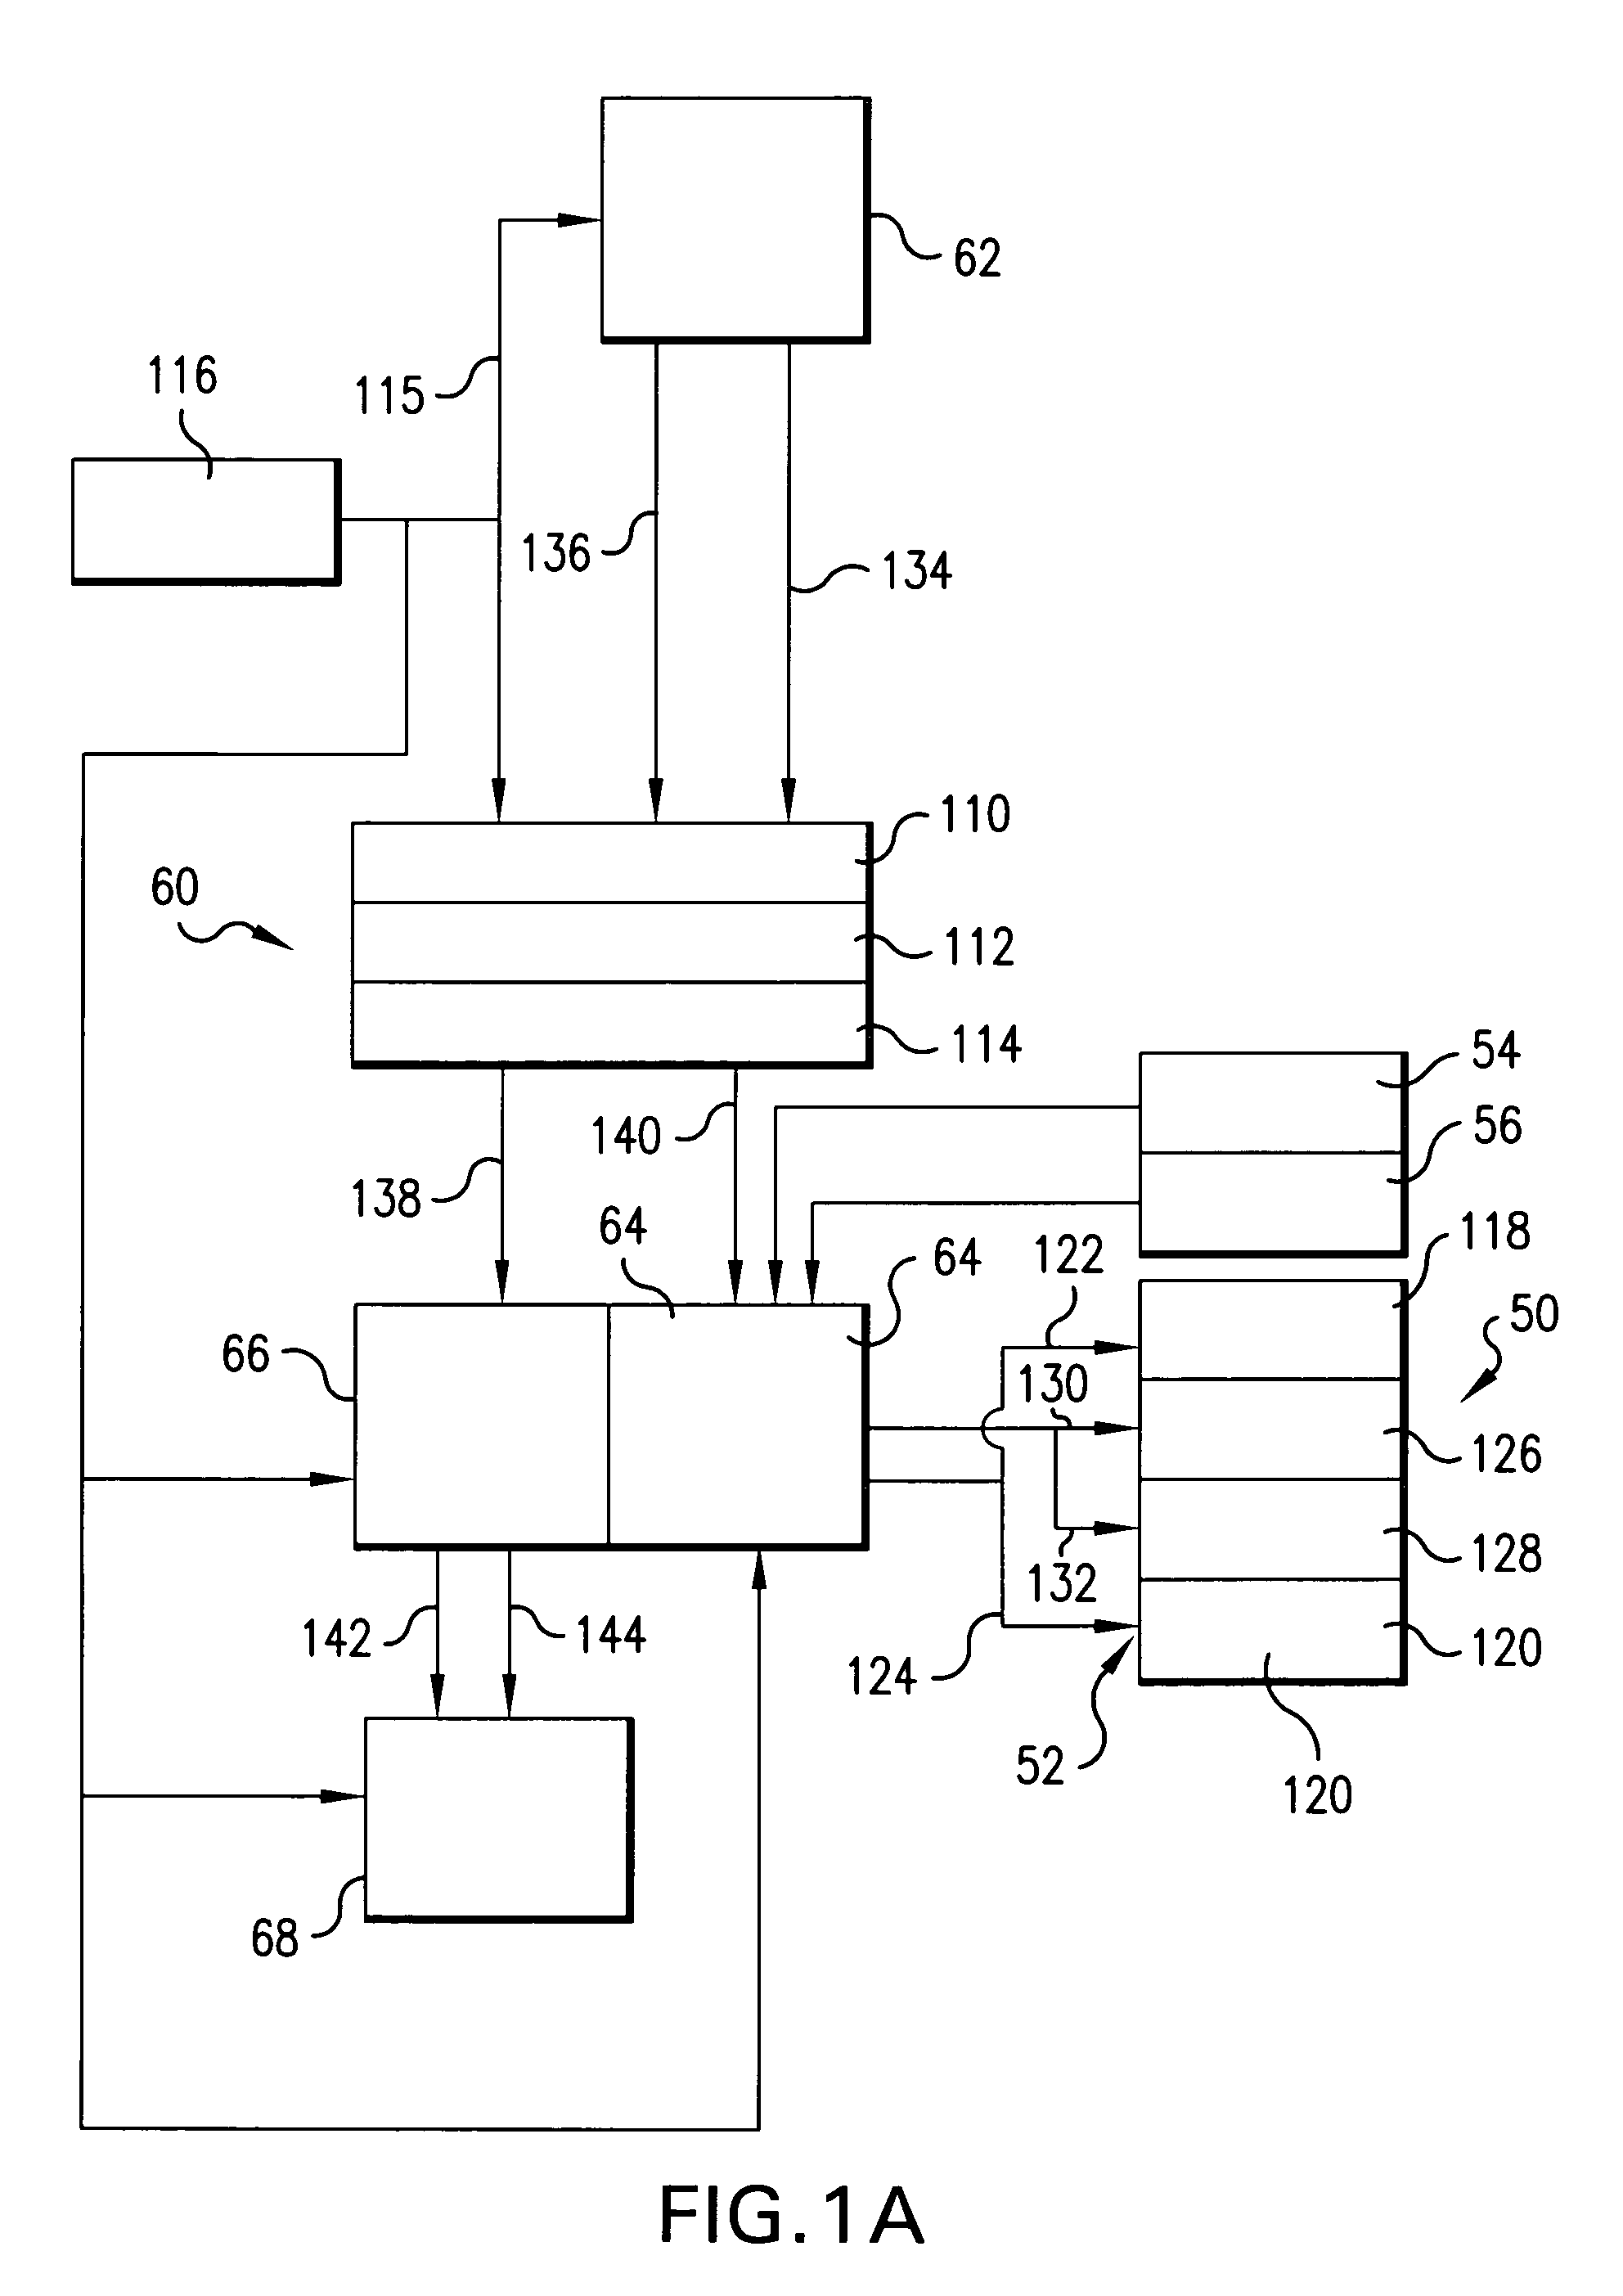 Collector for EUV light source